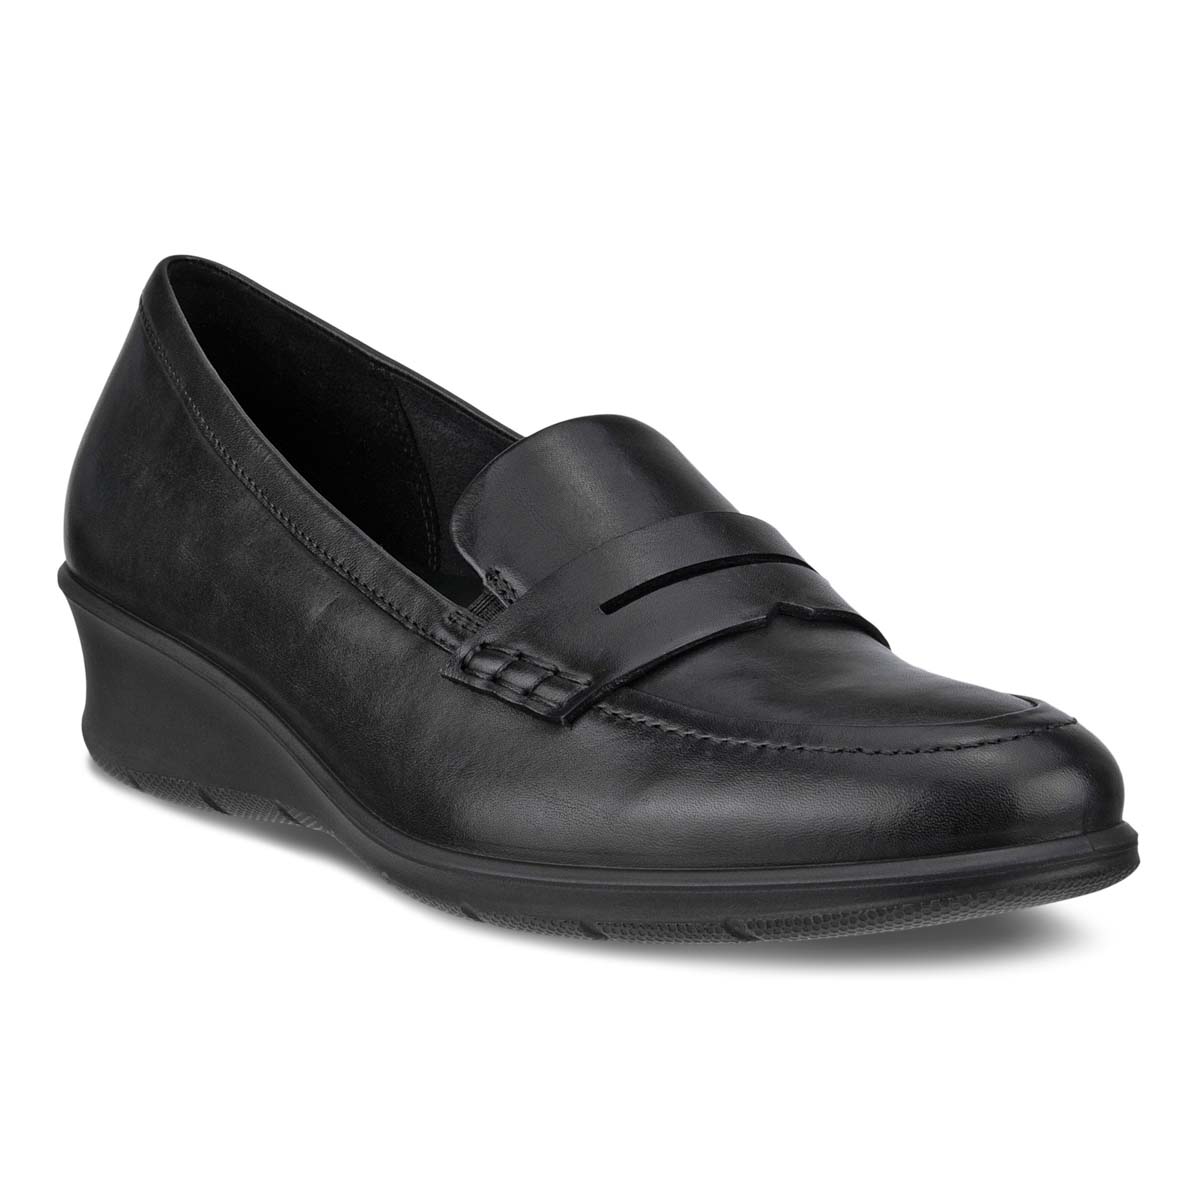 Ecco Felicia Loafer Black Leather Womens Comfort Slip On Shoes 217323-01001 In Size 41 In Plain Black Leather